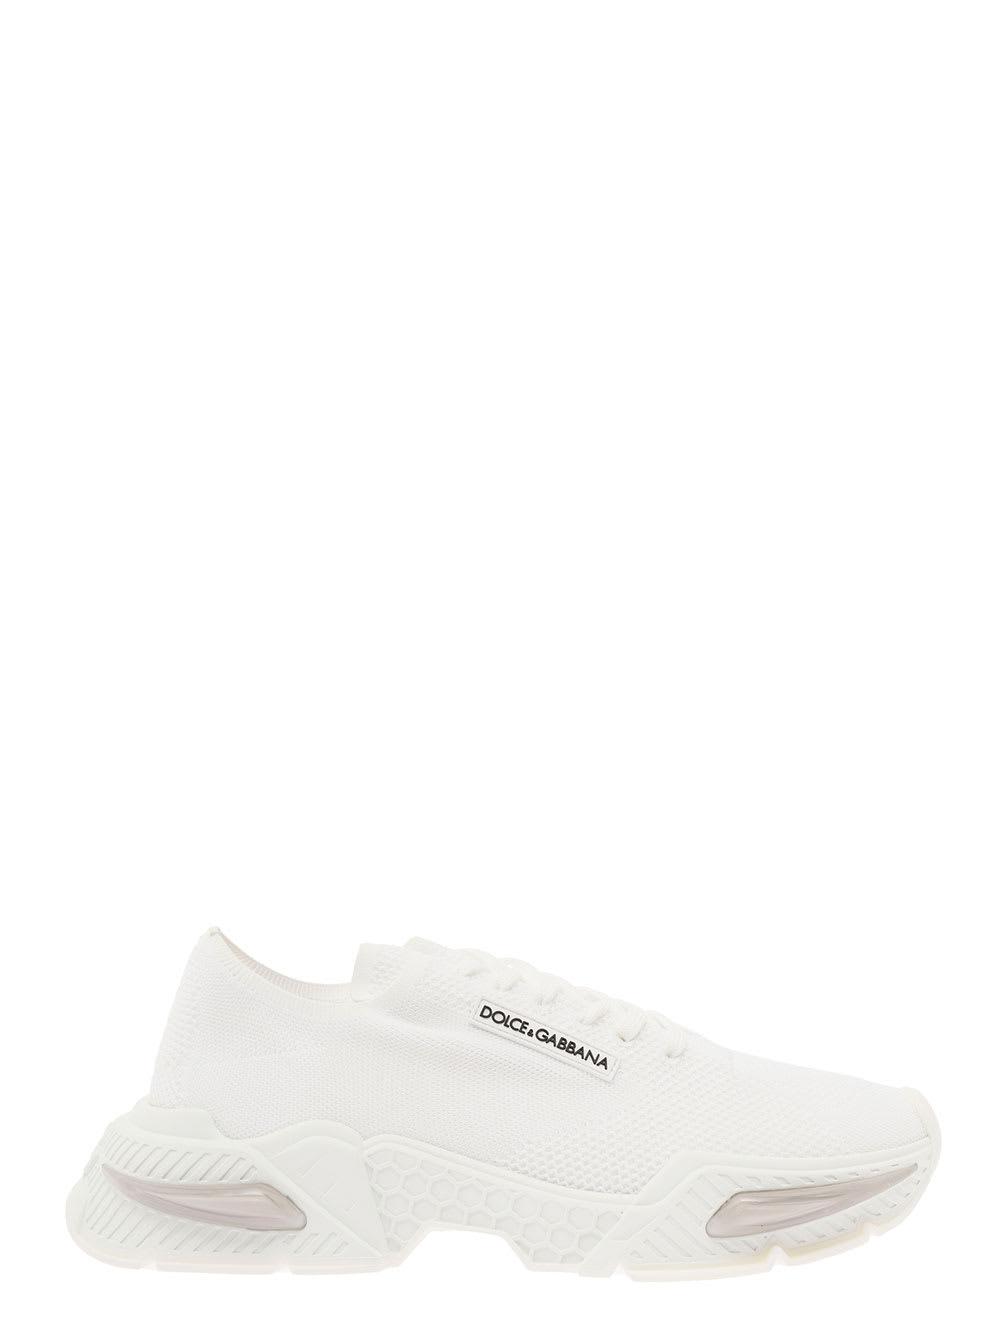 Dolce & Gabbana White Daymaster Sneakers In Stretch Knit Man for Men | Lyst